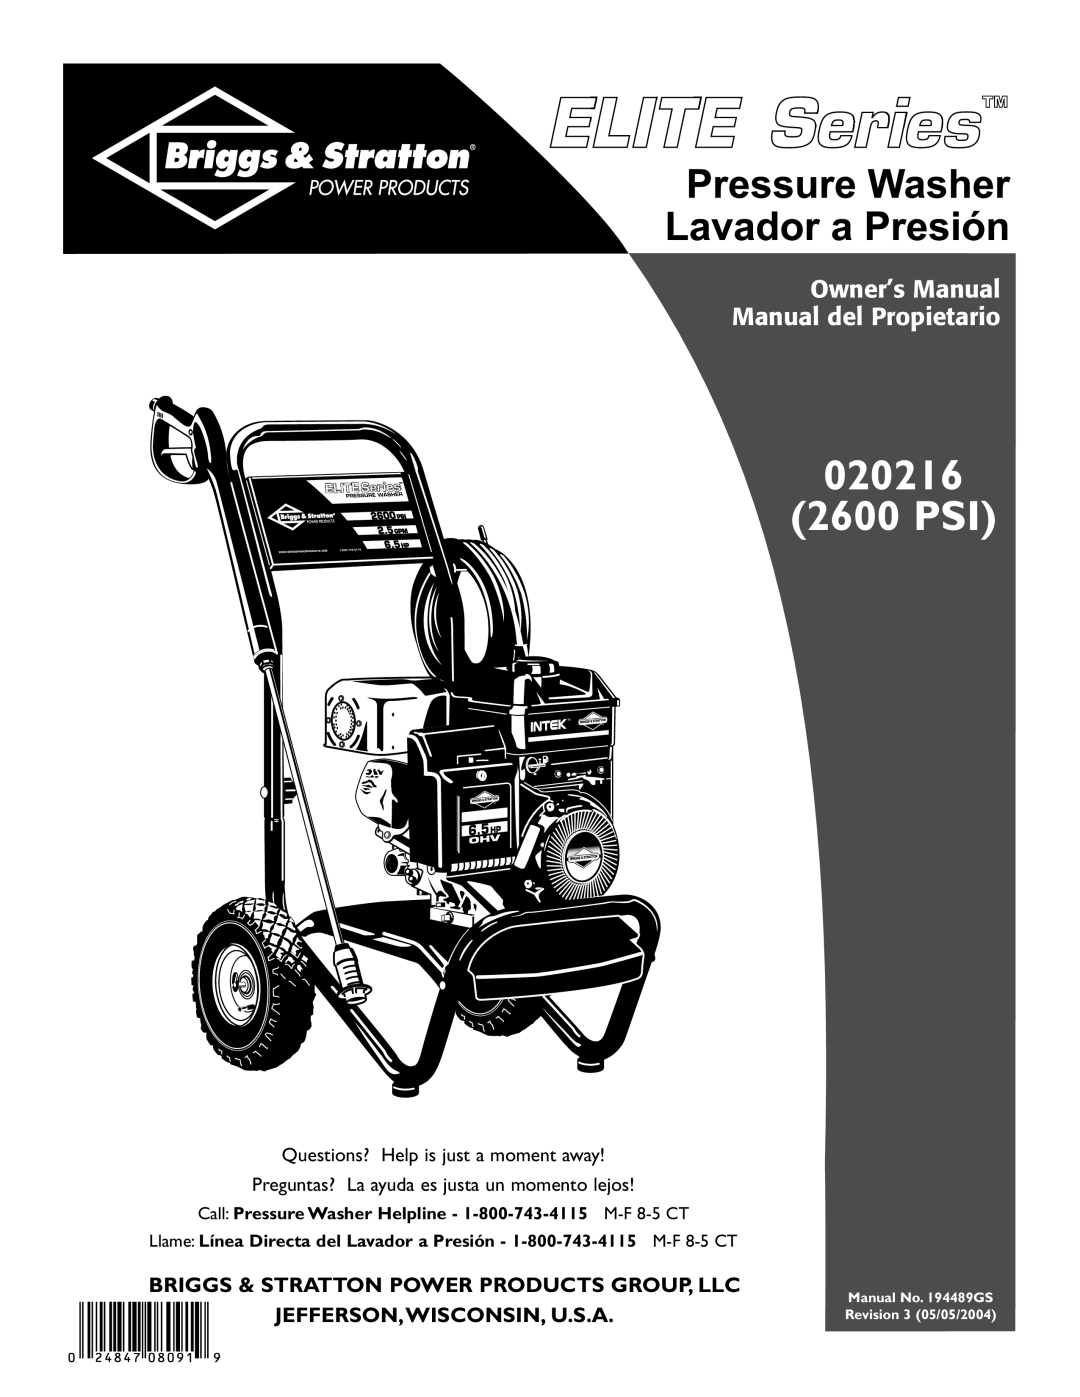 Briggs & Stratton 20216 owner manual Briggs & Stratton Power Products Group, Llc, Jefferson,Wisconsin, U.S.A 